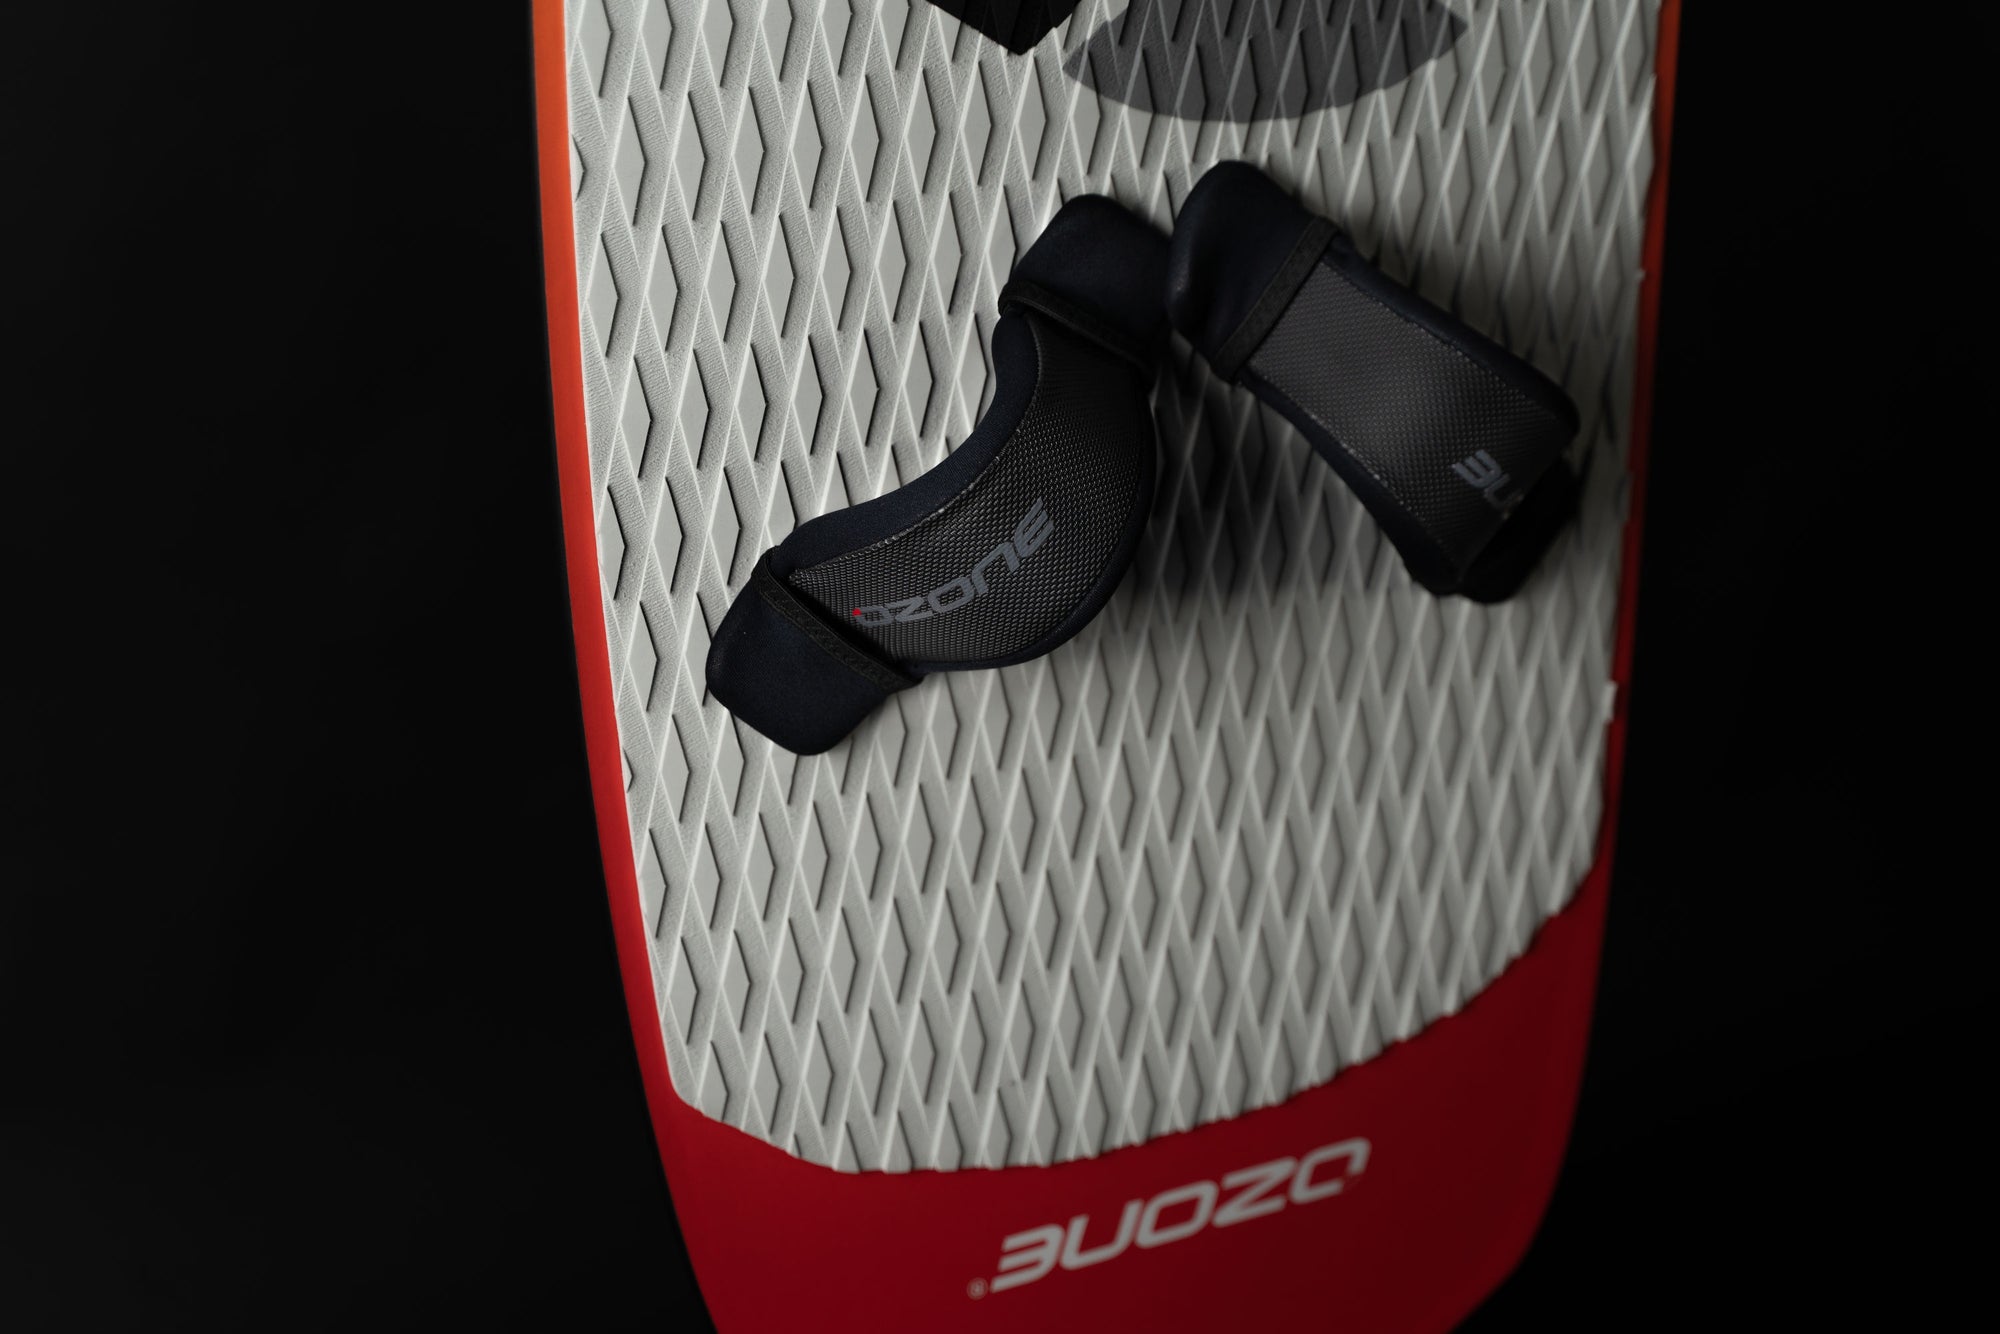 Ozone Apex V1 kitesurfing Board with straps on the board with a black background.